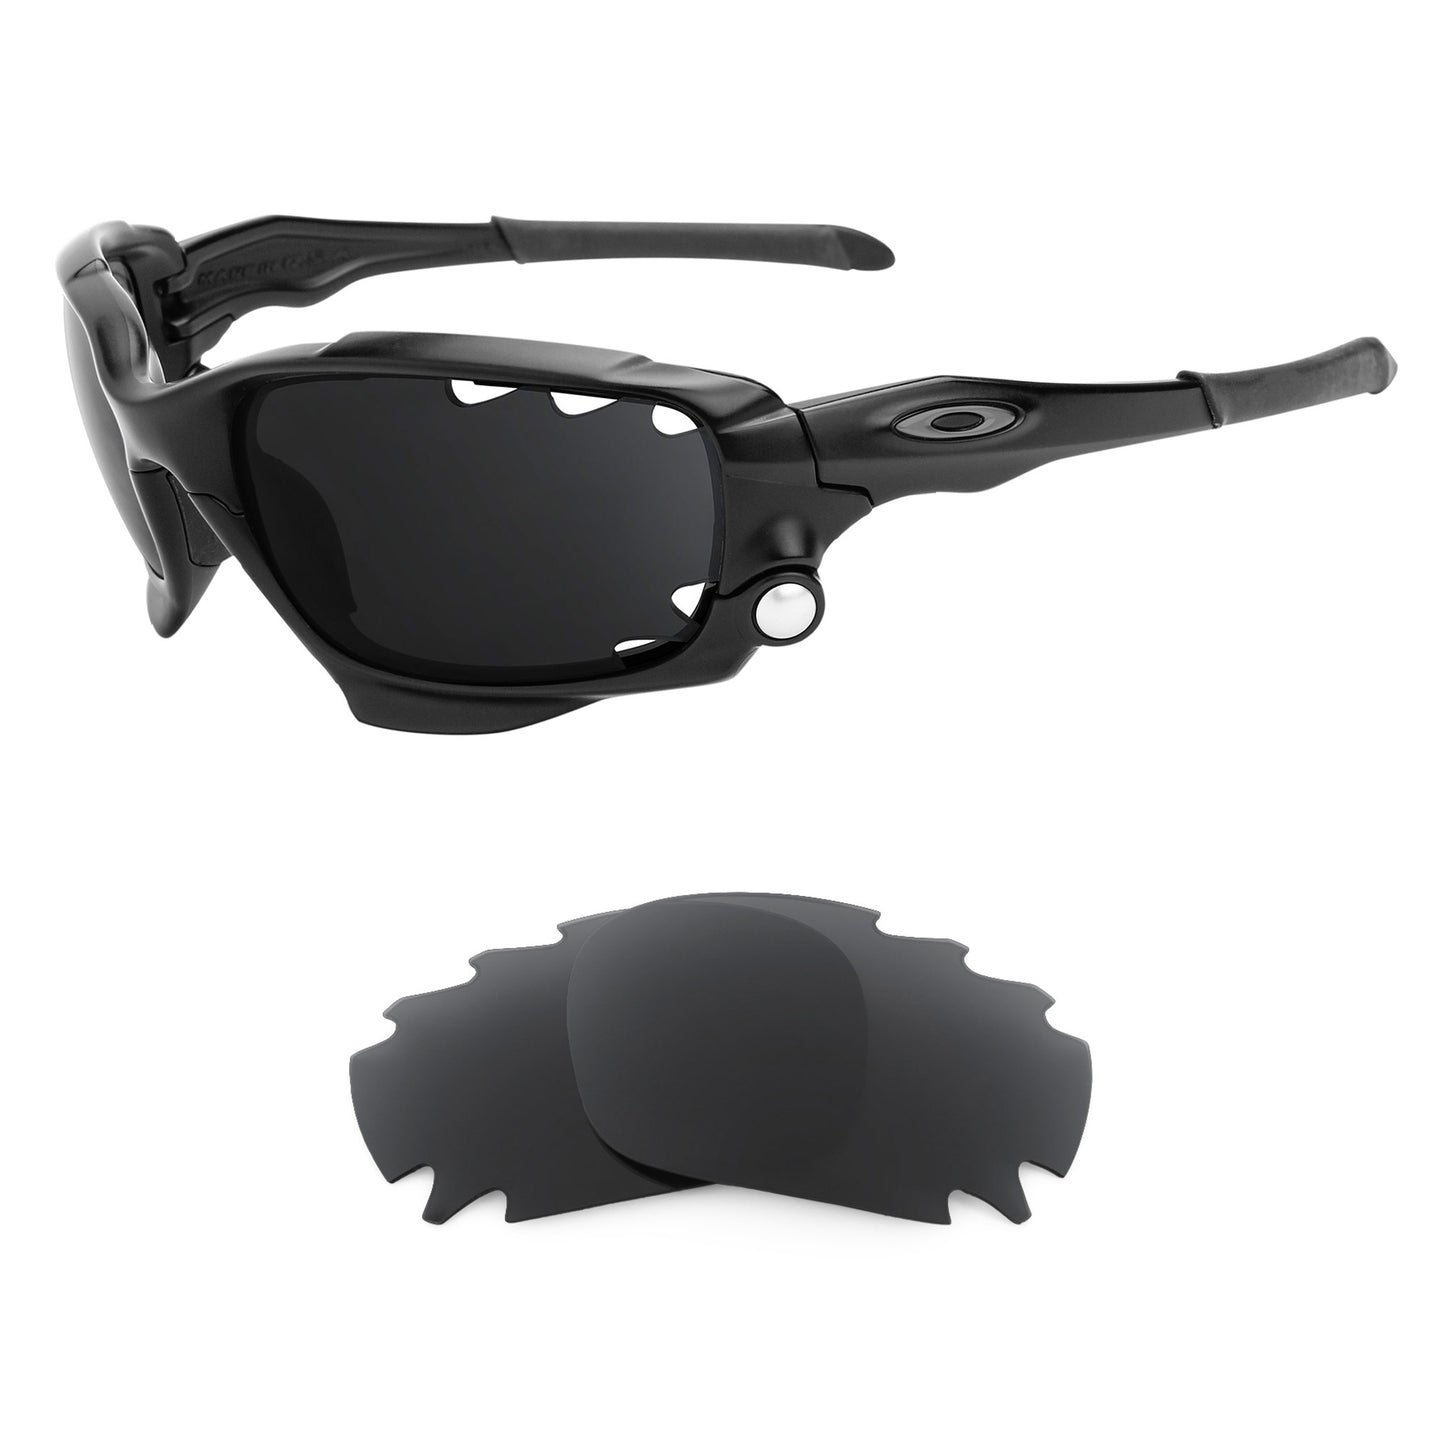 Oakley Racing Jacket Vented sunglasses with replacement lenses